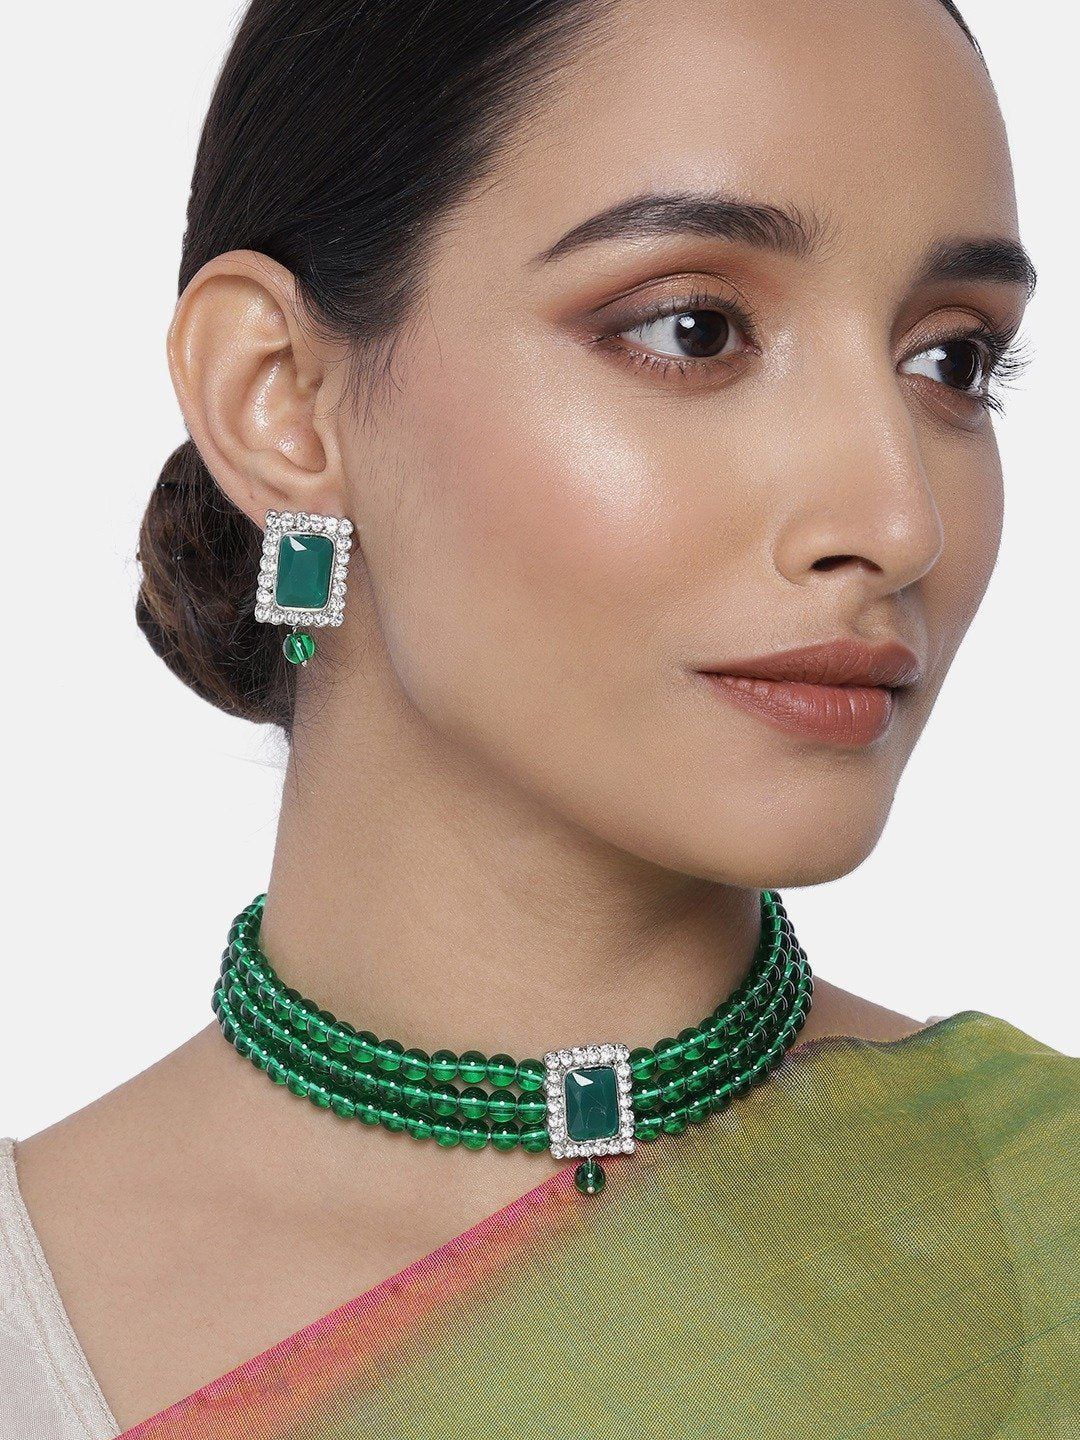 Women's  Rhodium Plated Green Stone Studded Pearl Choker Necklace Jewellery Set With Earrings - i jewels